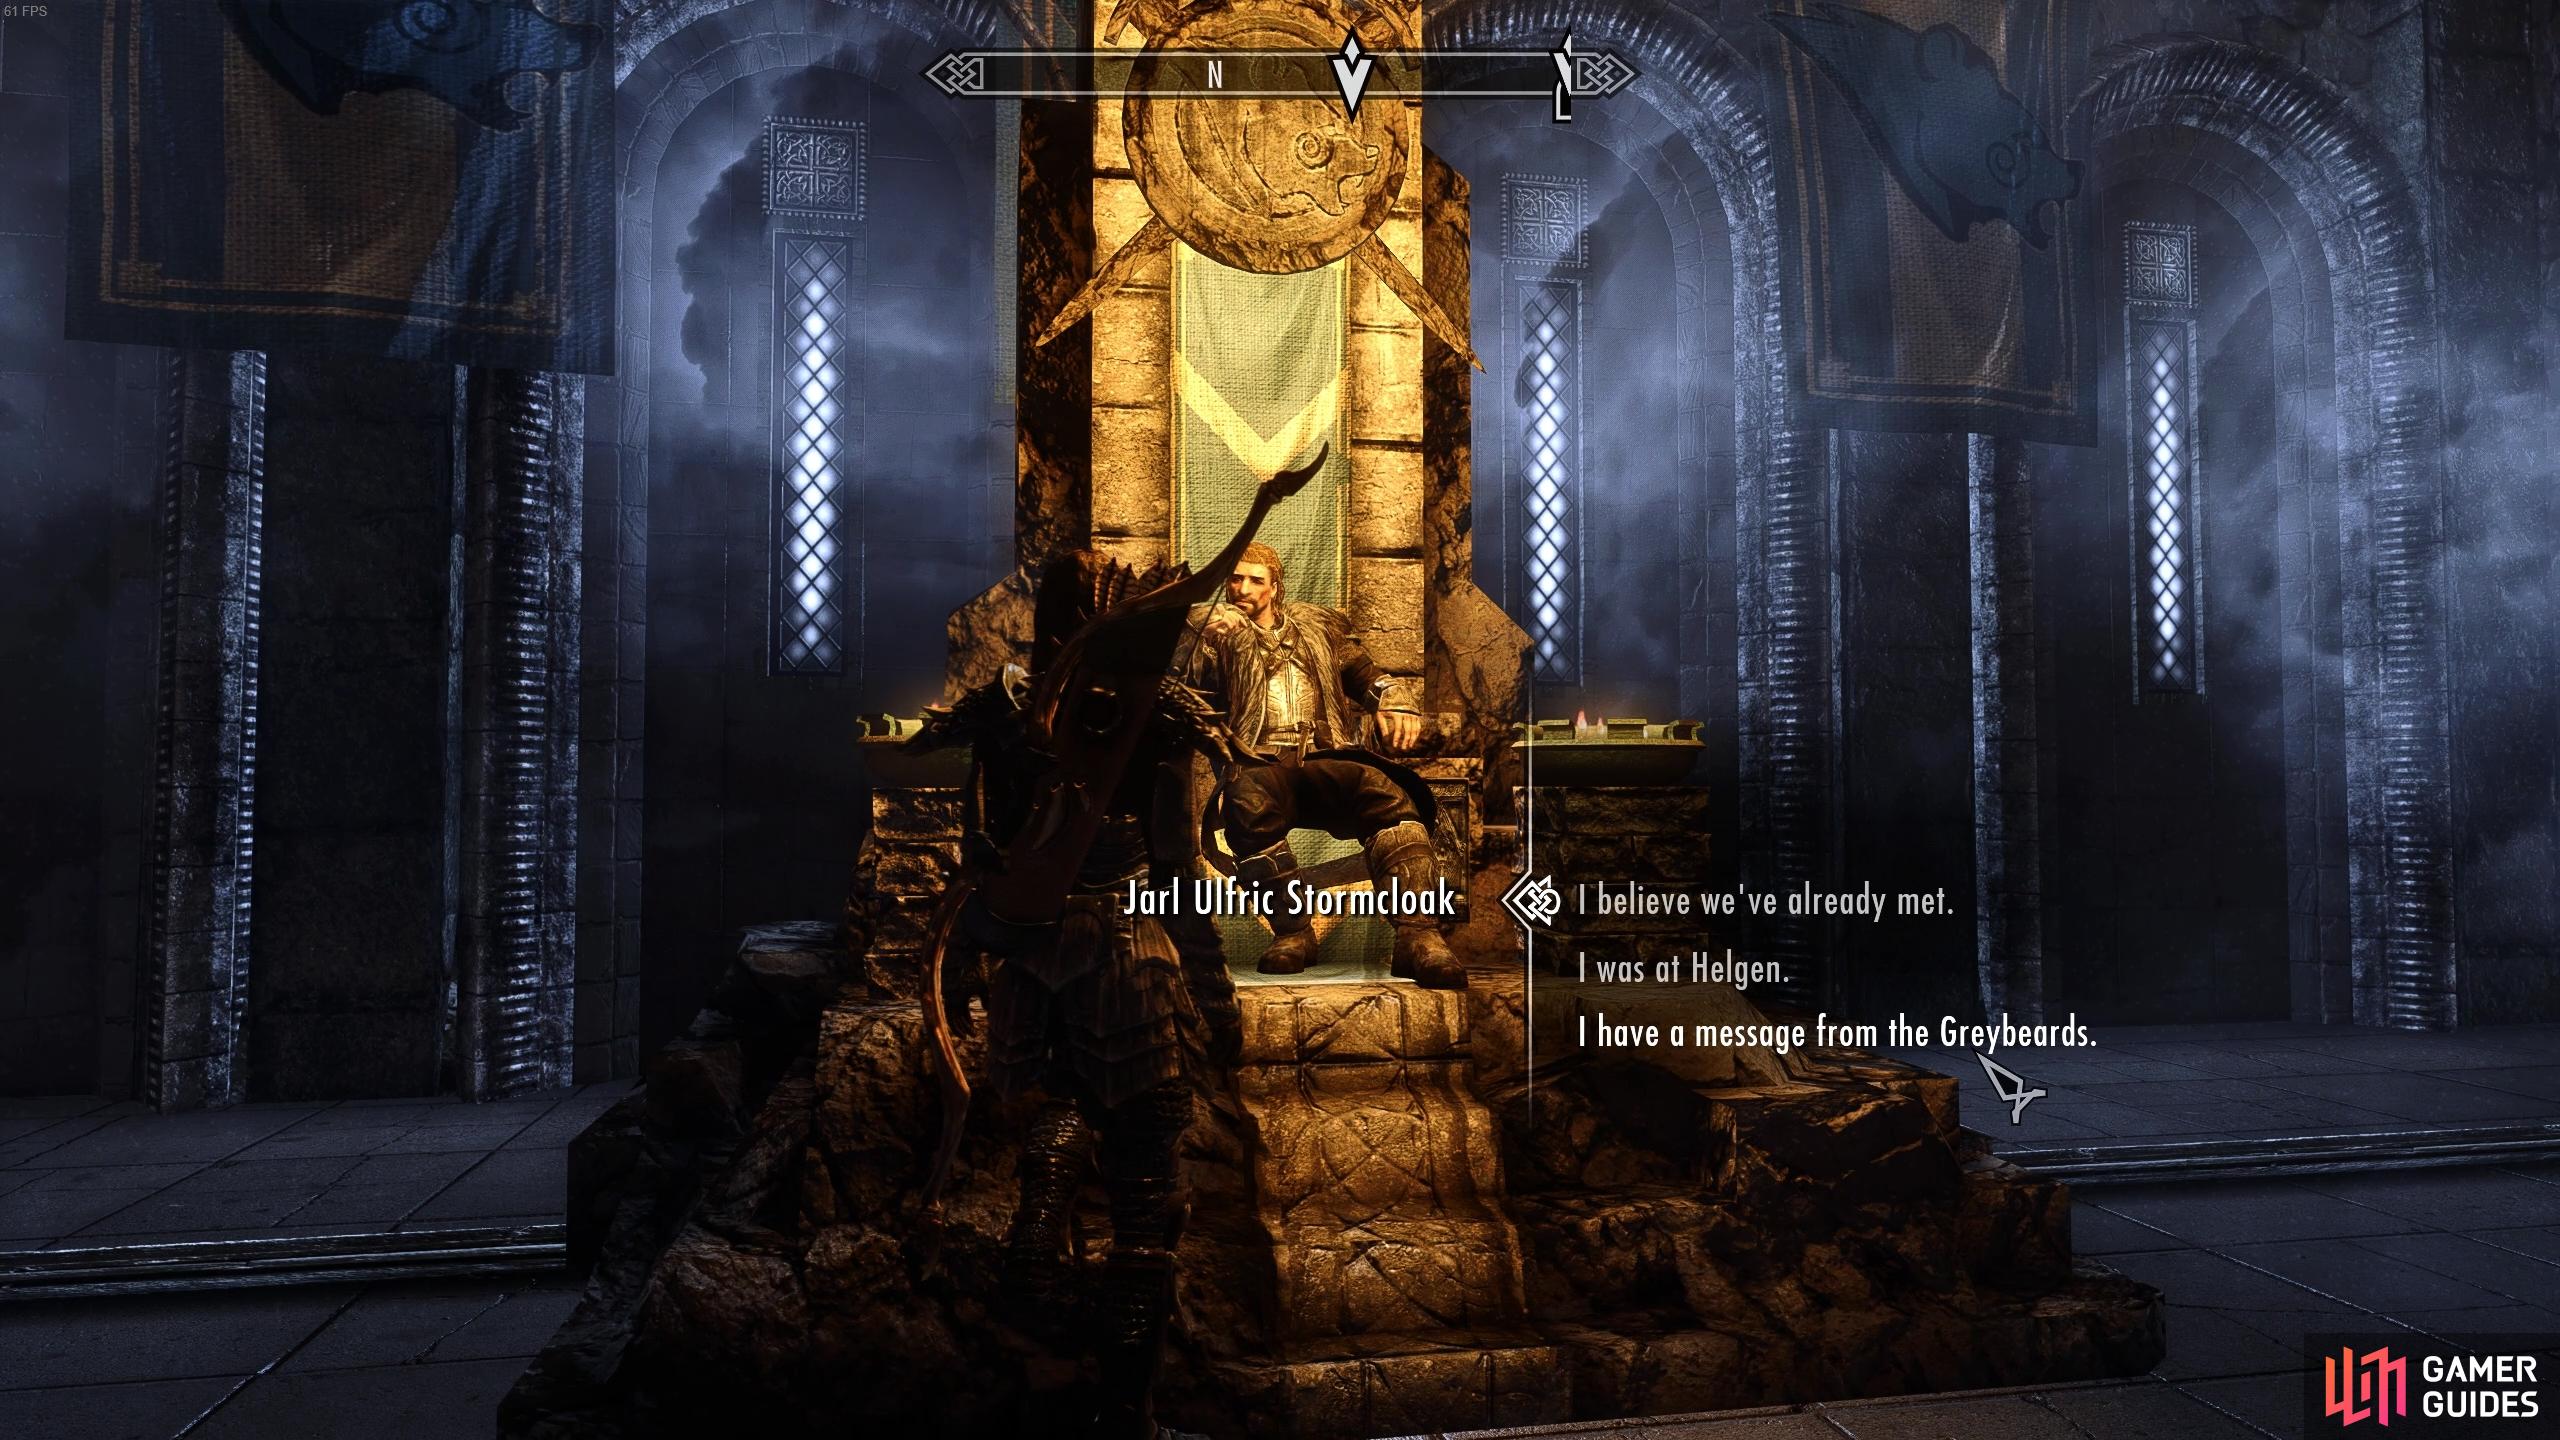 Speak with Ulfric at the Palace of the Kings.